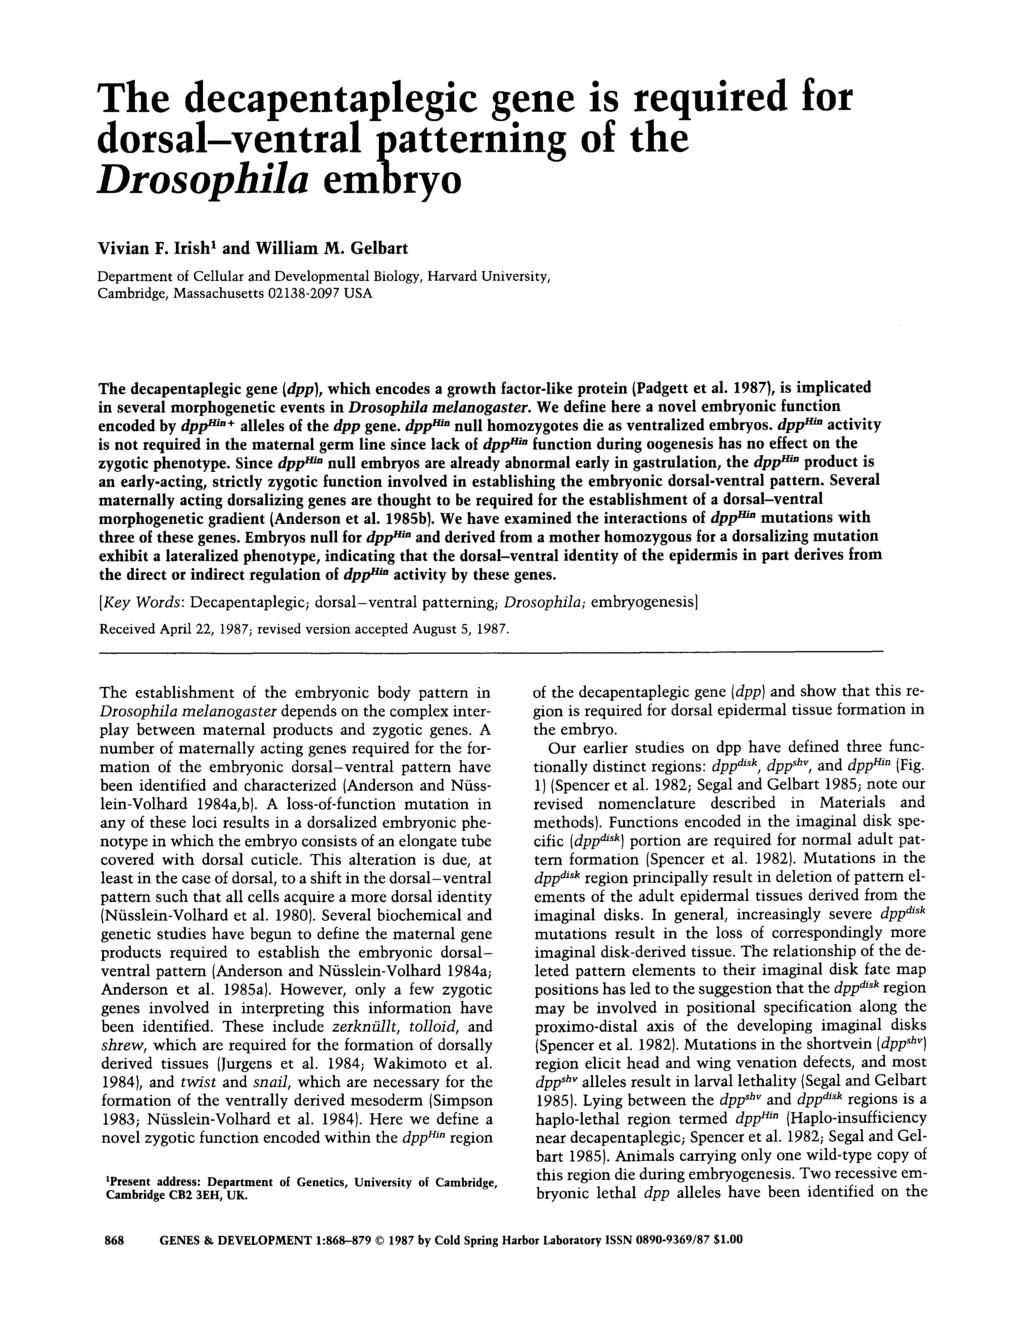 The decapentaplegic gene is required for dorsal-ventral patterning of the Drosophila embryo Vivian F. Irish 1 and William M.